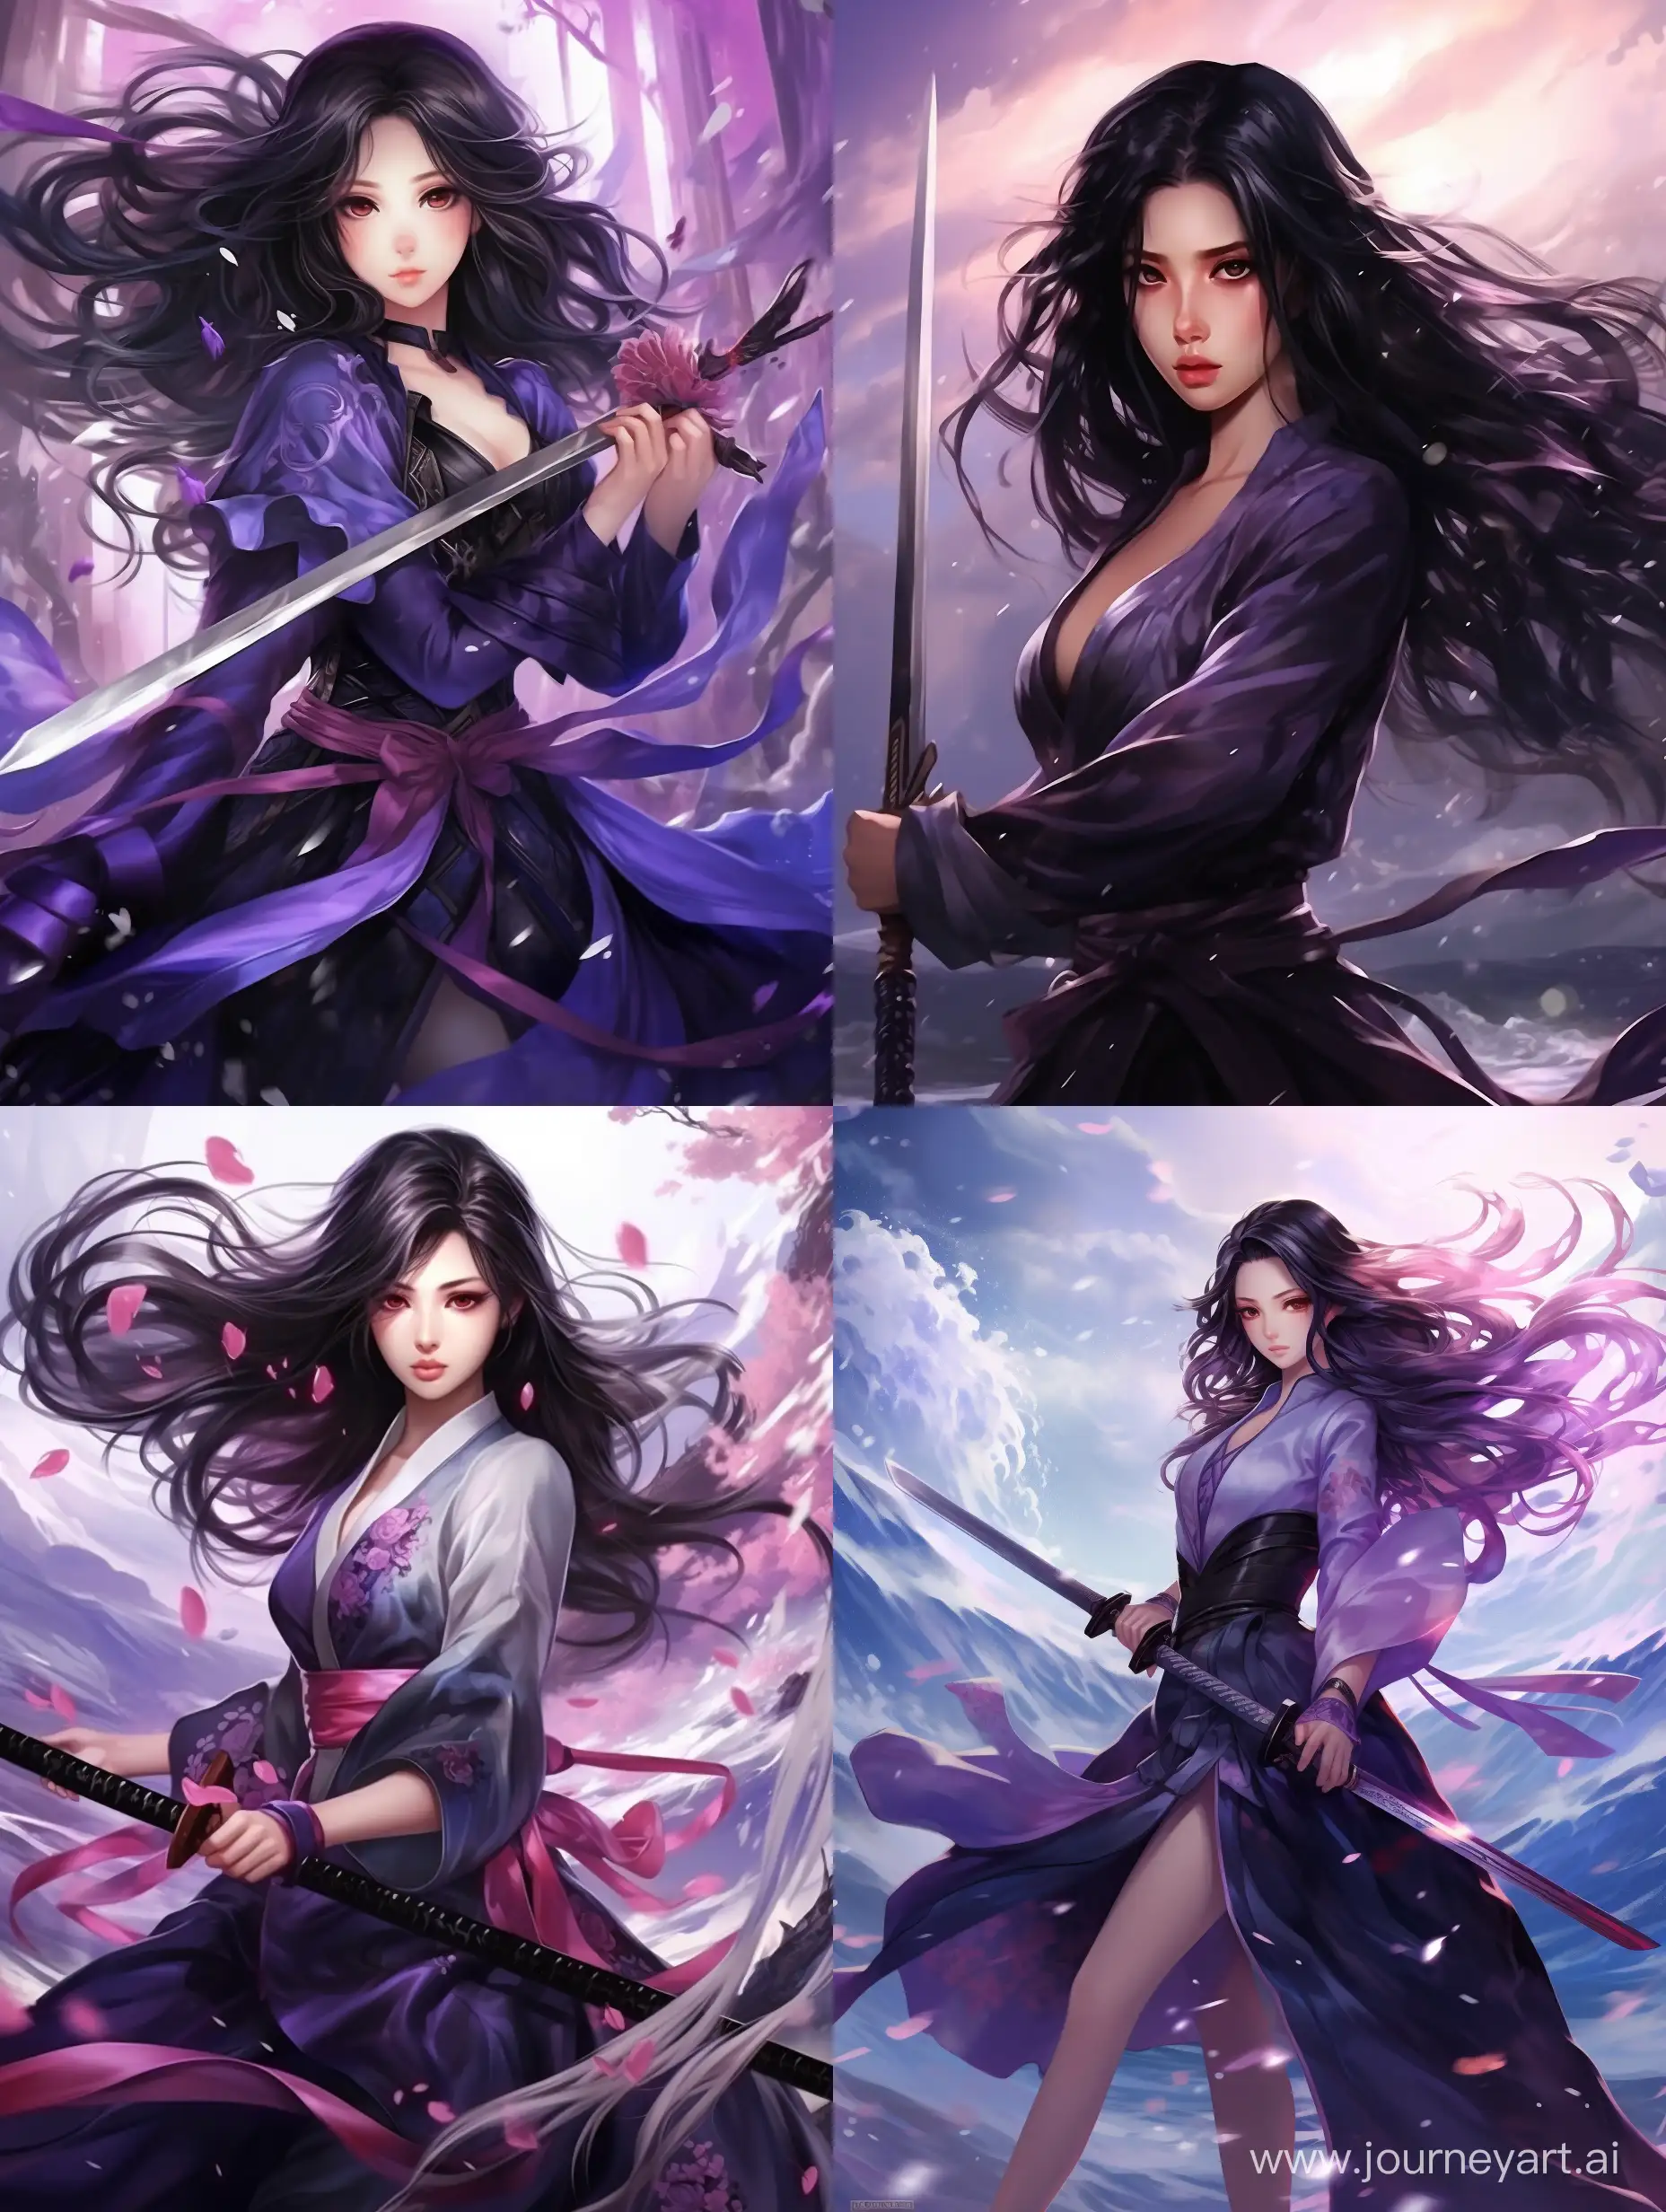 long black haired beautiful girl wears a fit clothes with a purple kimono, katana in her hand, purple and black energy floats around her, dynamic pose, fight pose, manga style art